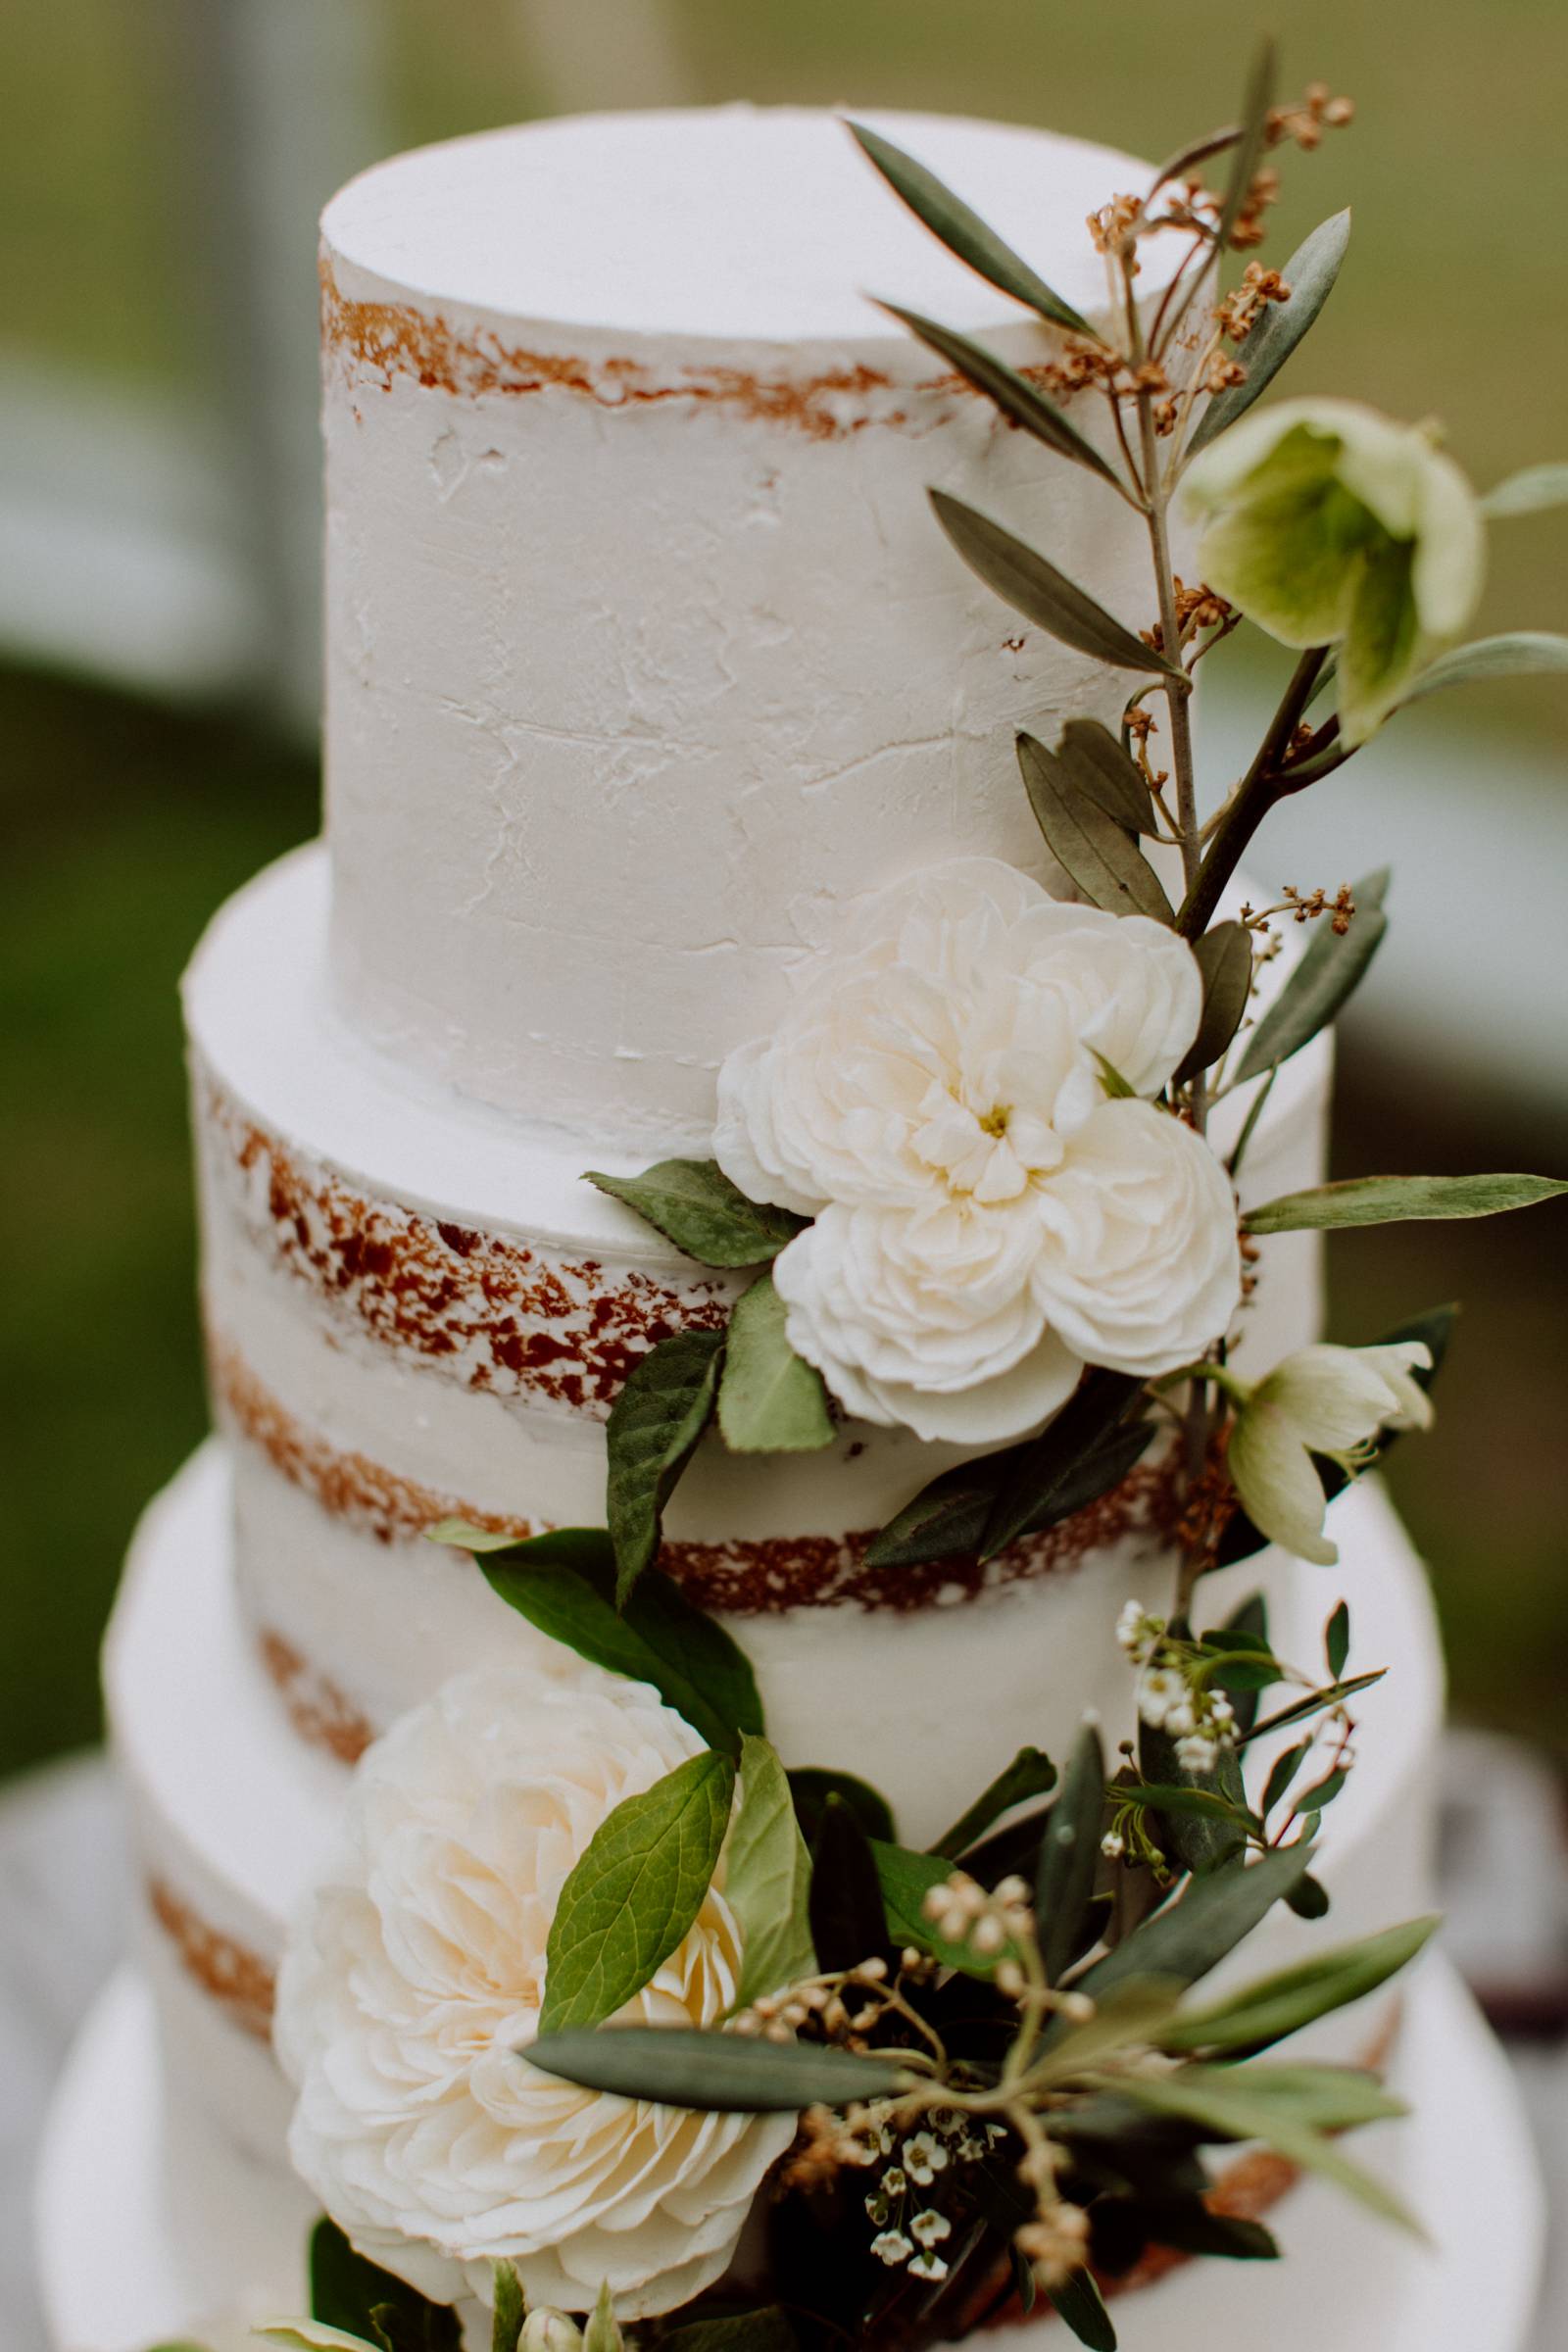 Melody Jacob: Beautiful floral cake designs by Ohcakes Winnie.